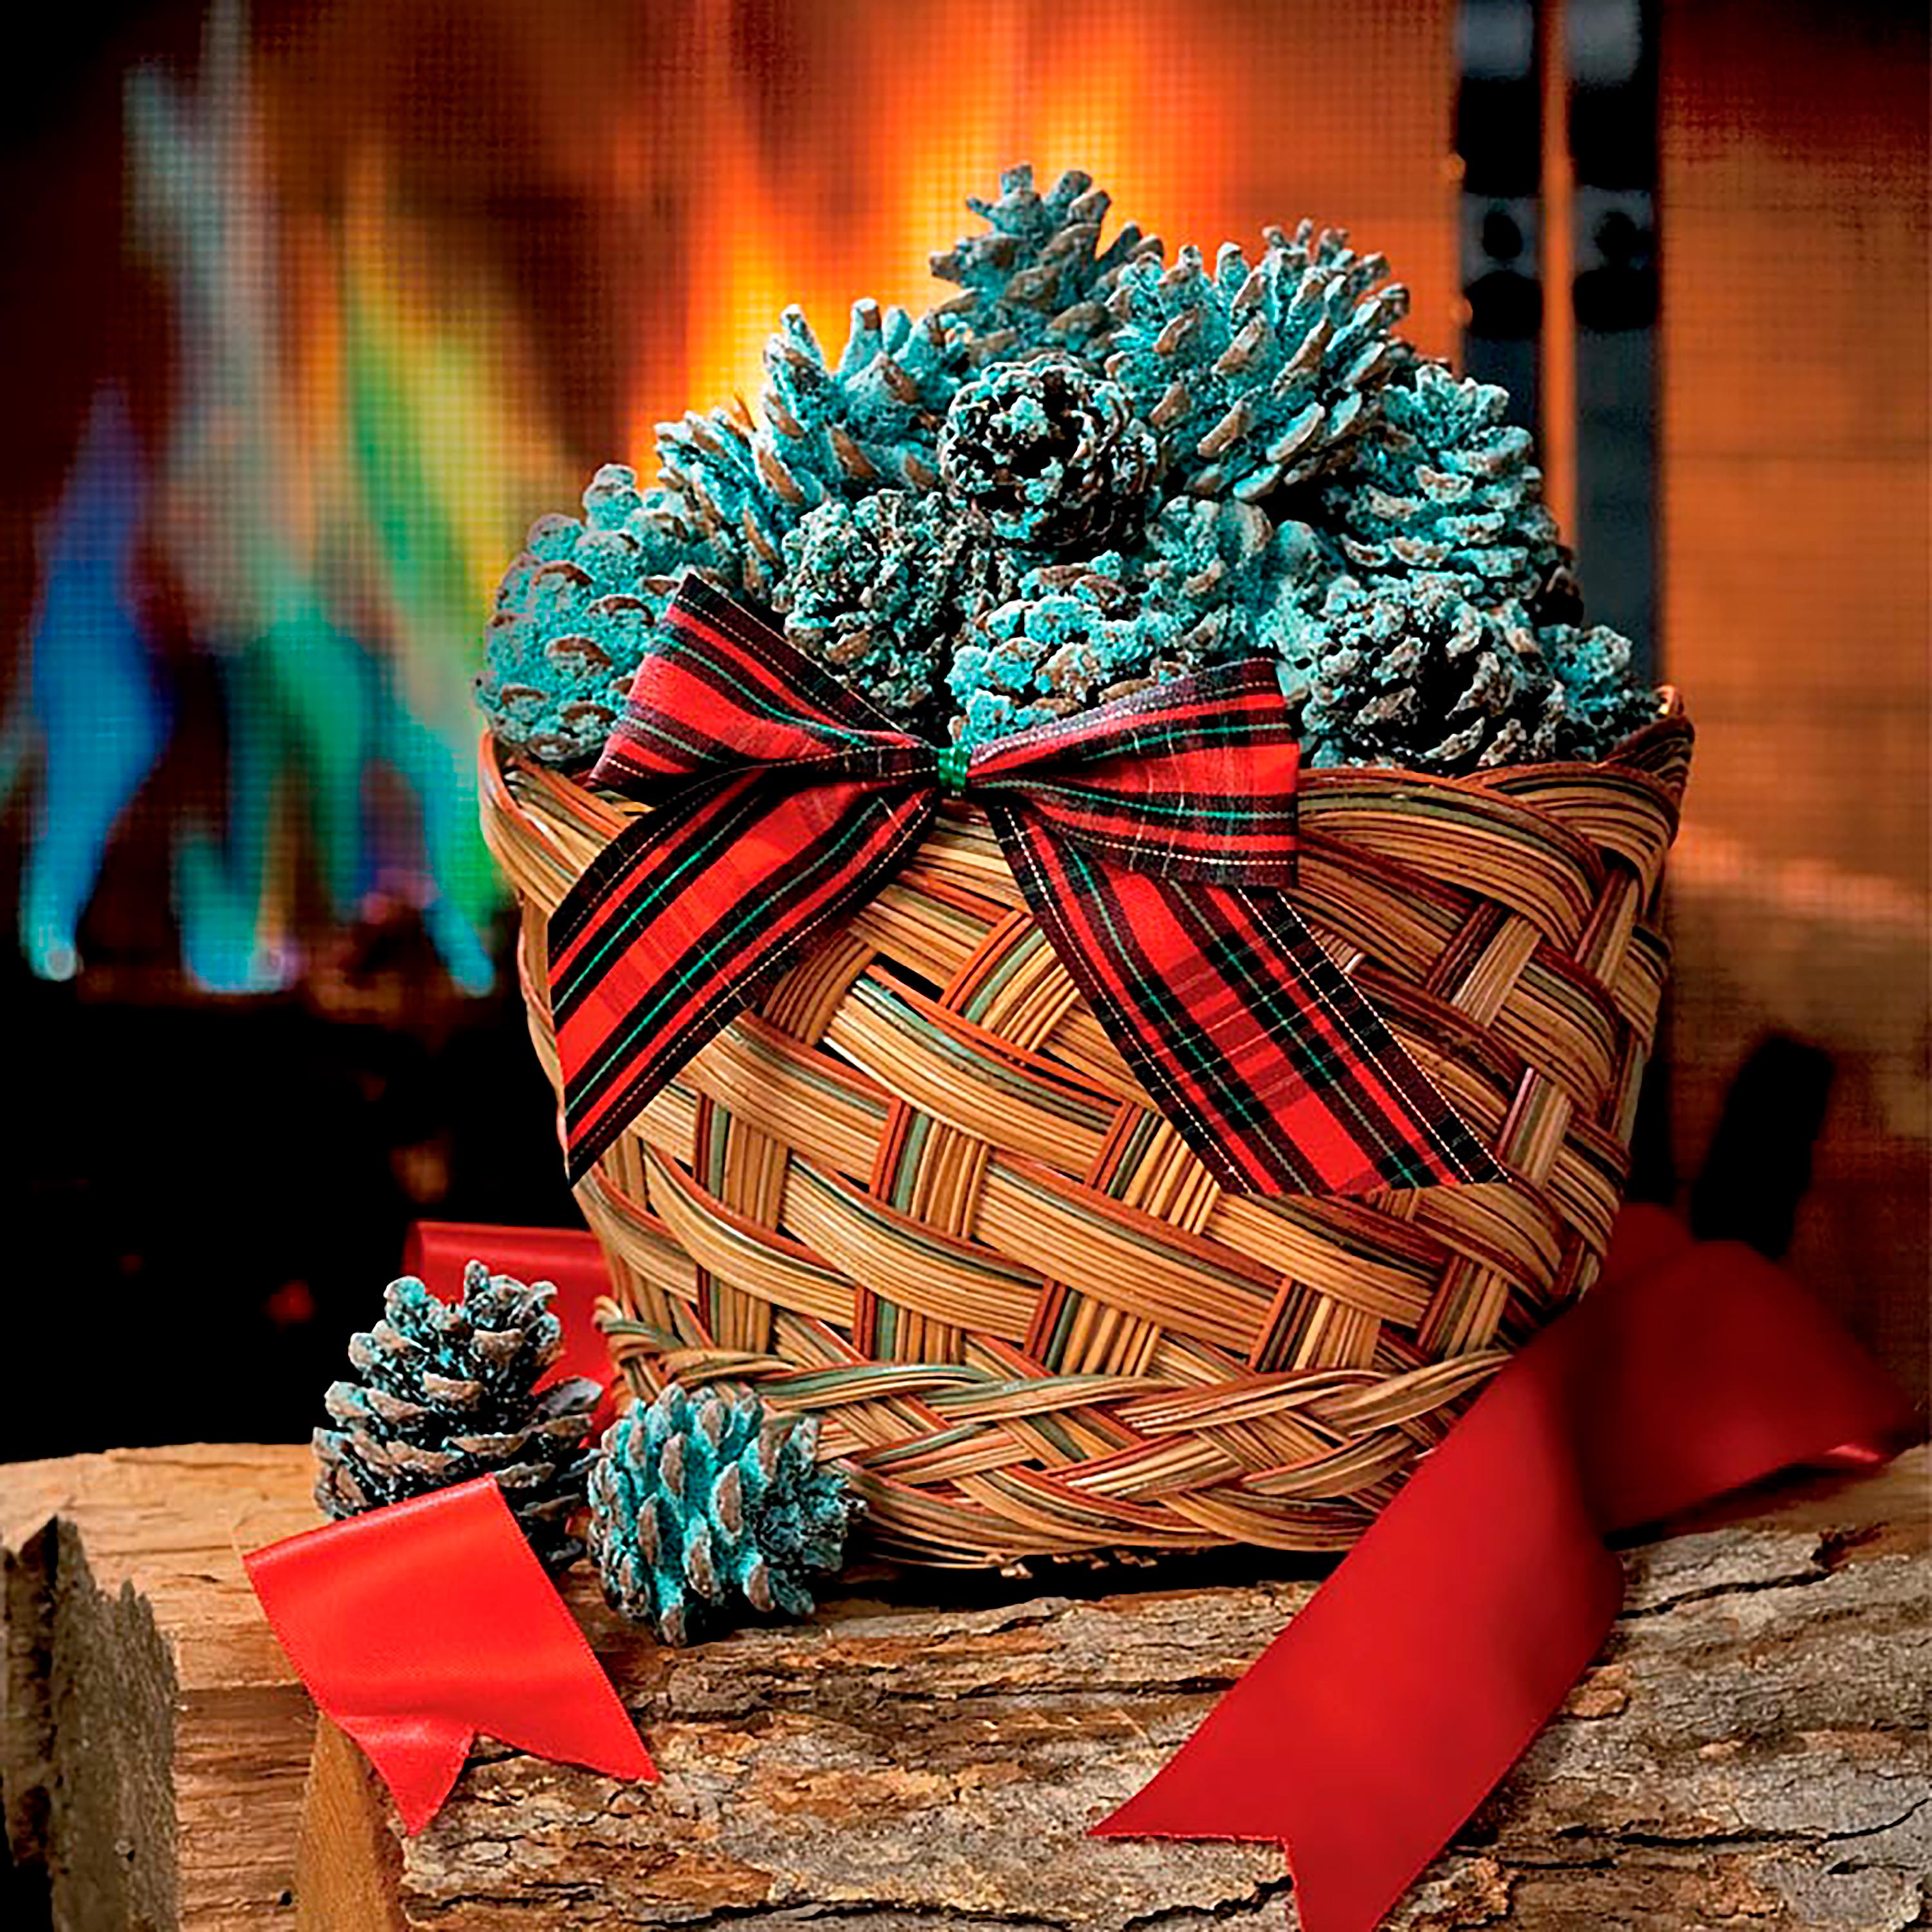 Color Cones that Create Blue and Green Flames in the Fireplace